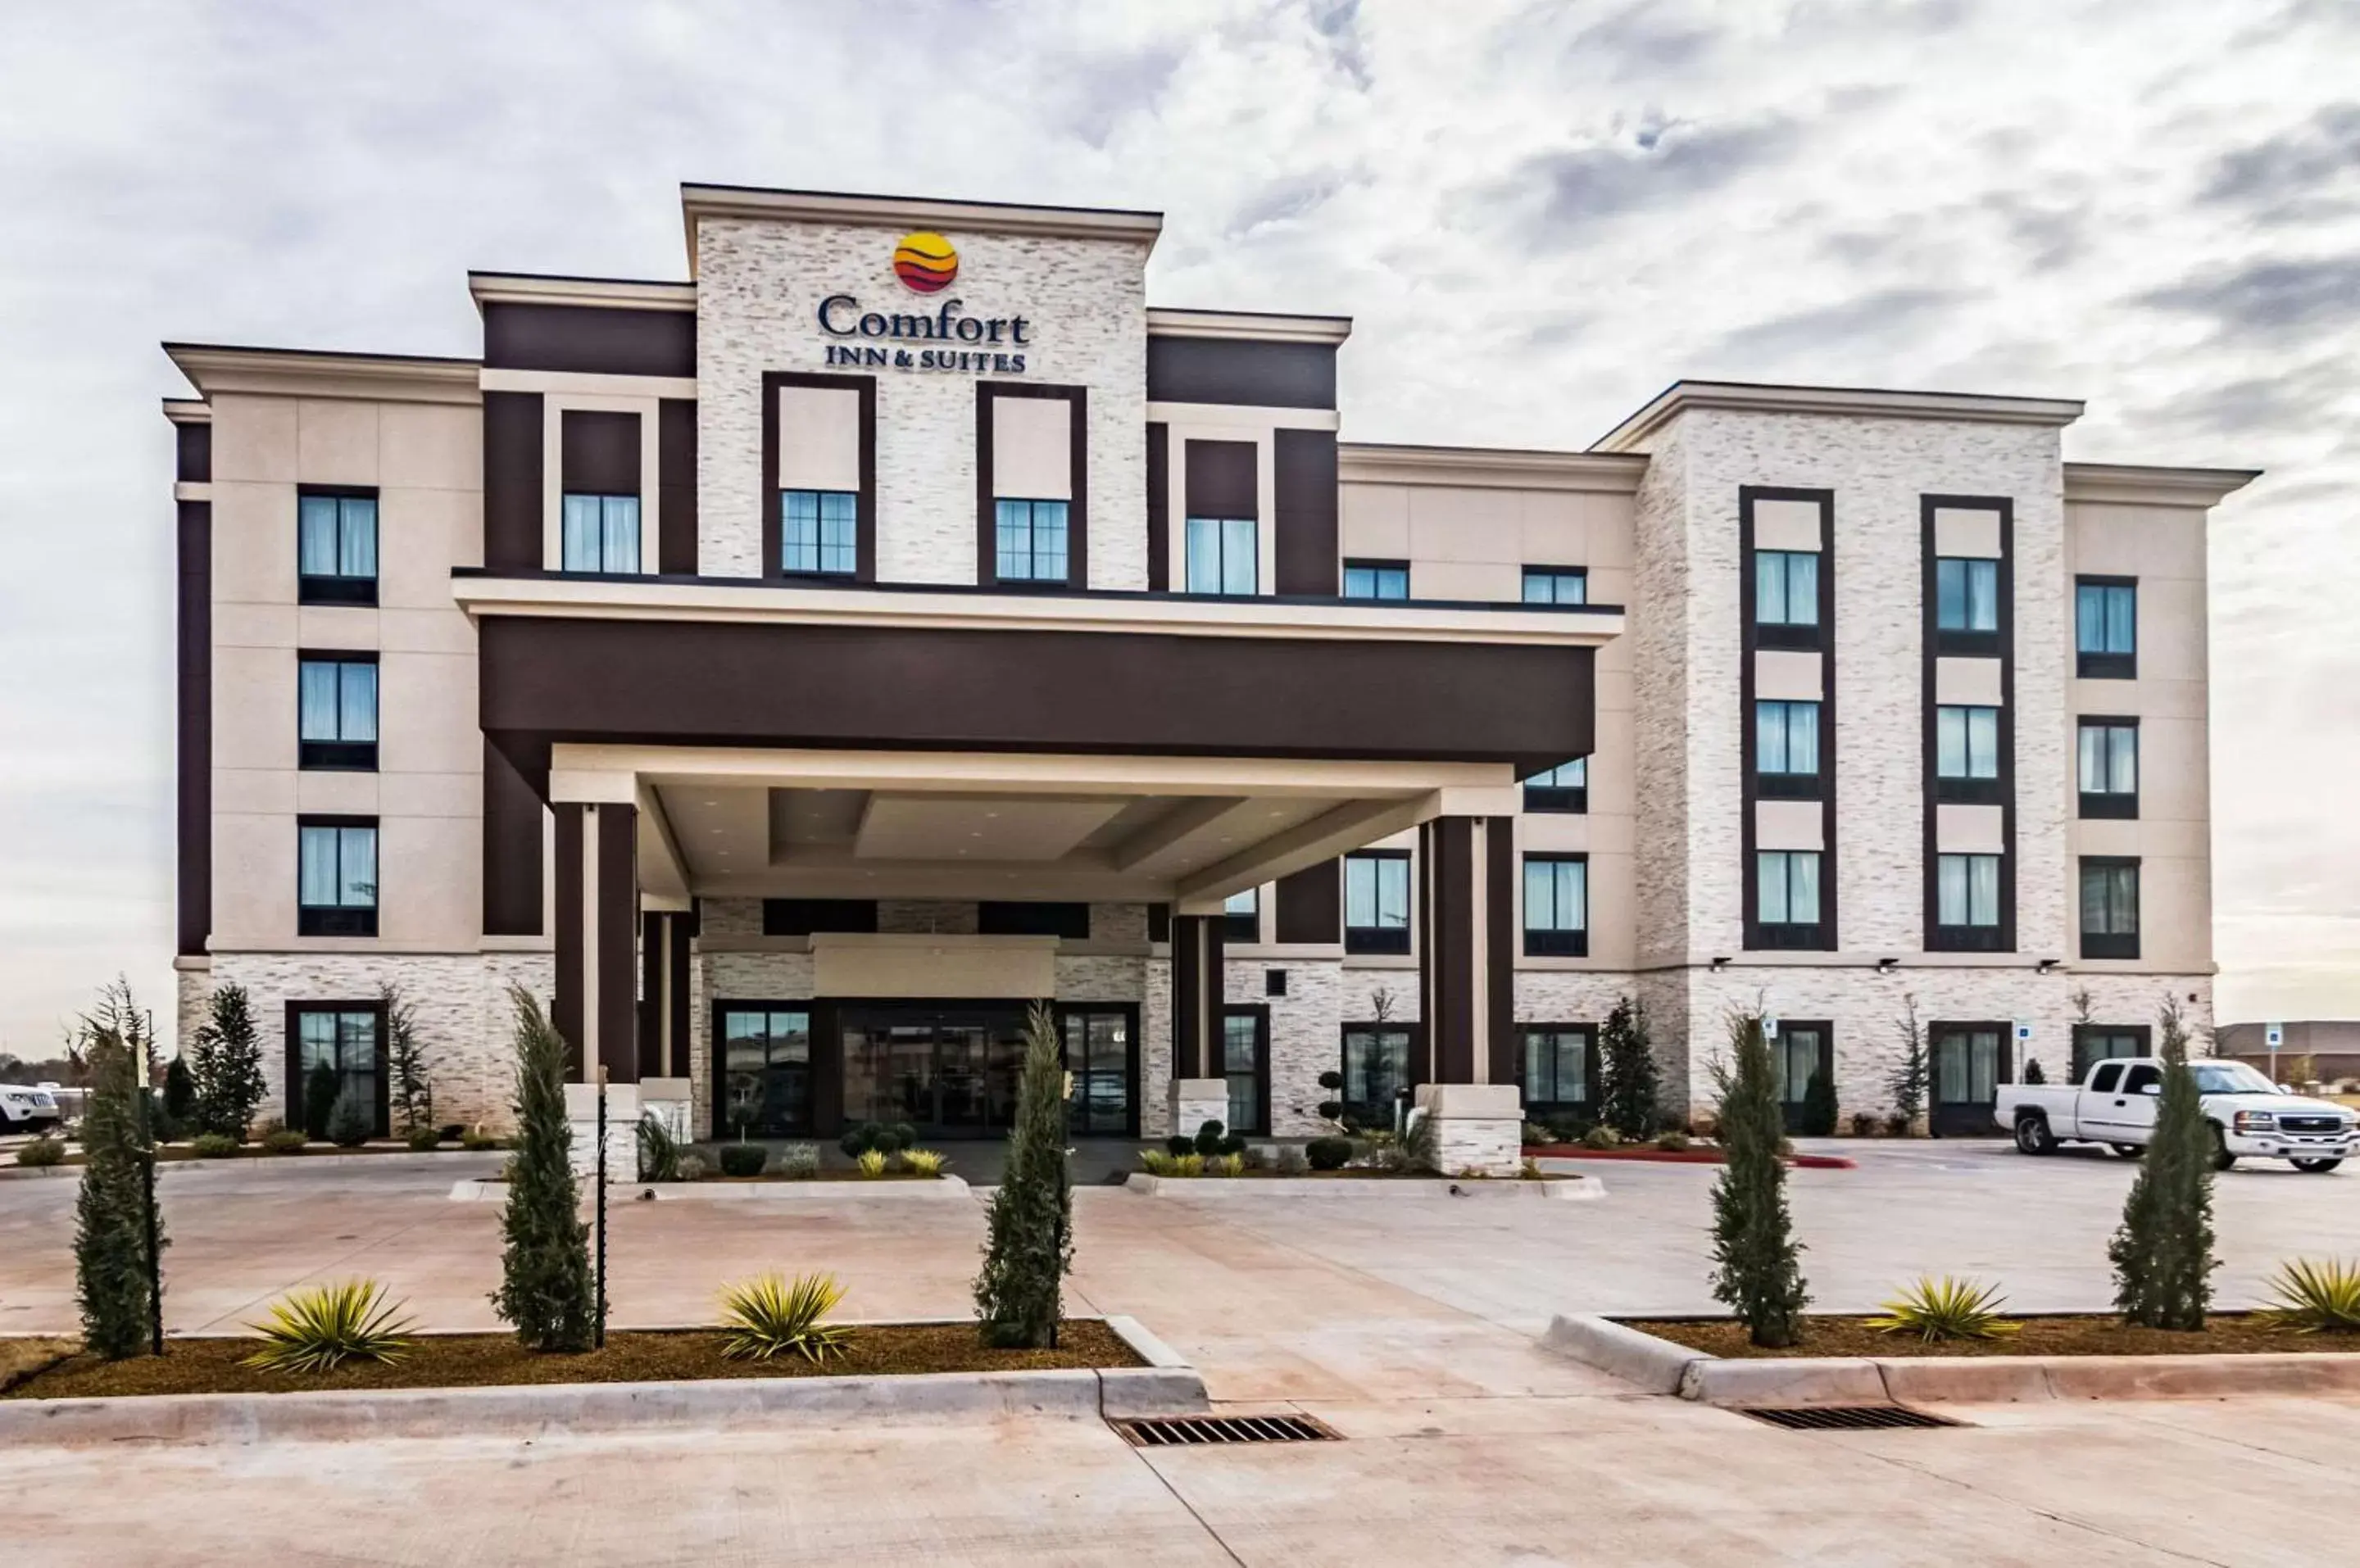 Property building in Comfort Inn & Suites Oklahoma City